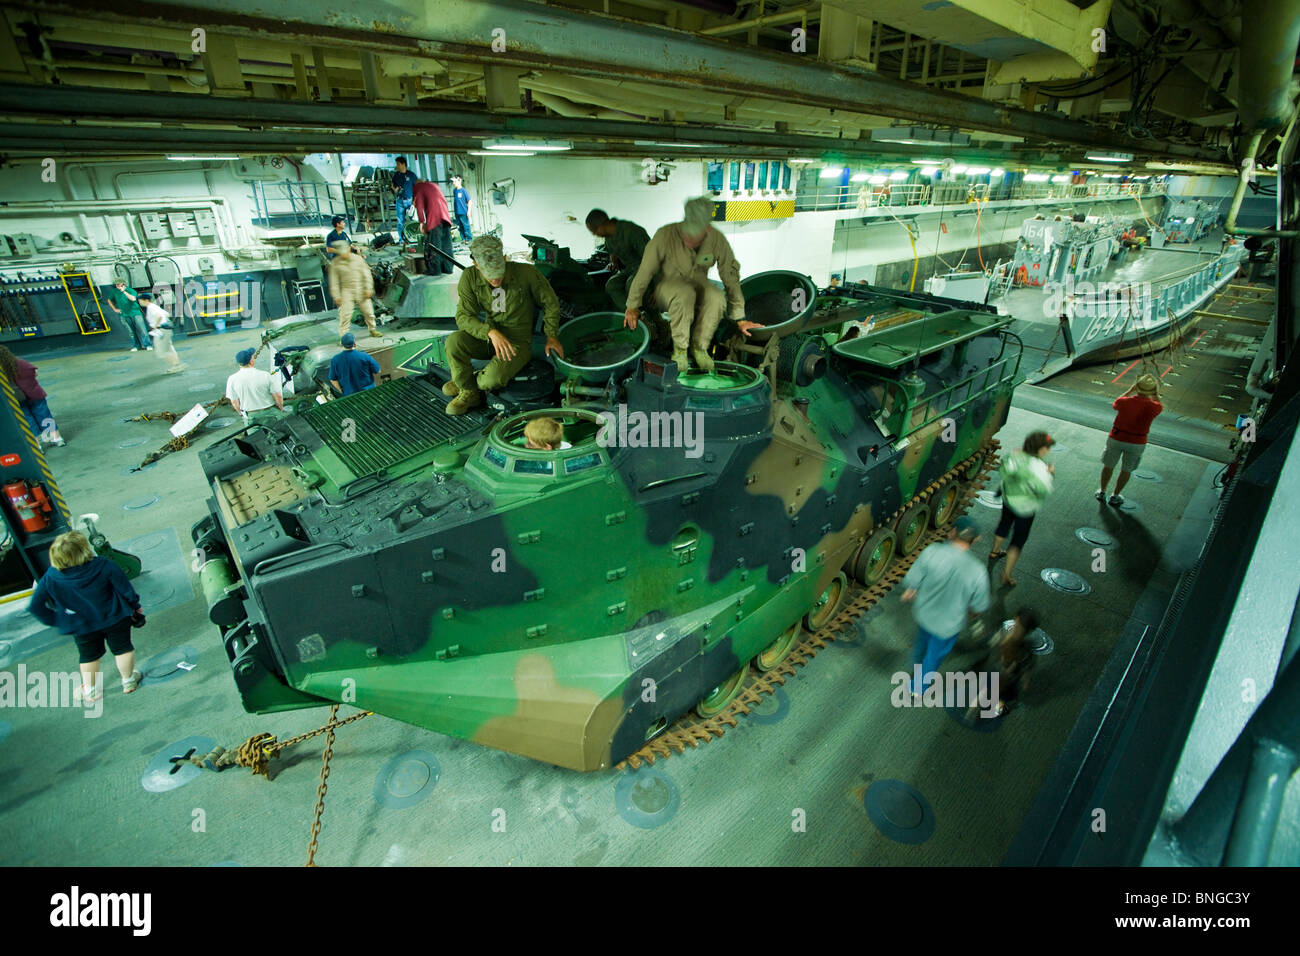 A tracked amphibious armored personnel carrier in the well deck of the US Navy amphibious assault ship USS WASP. Stock Photo